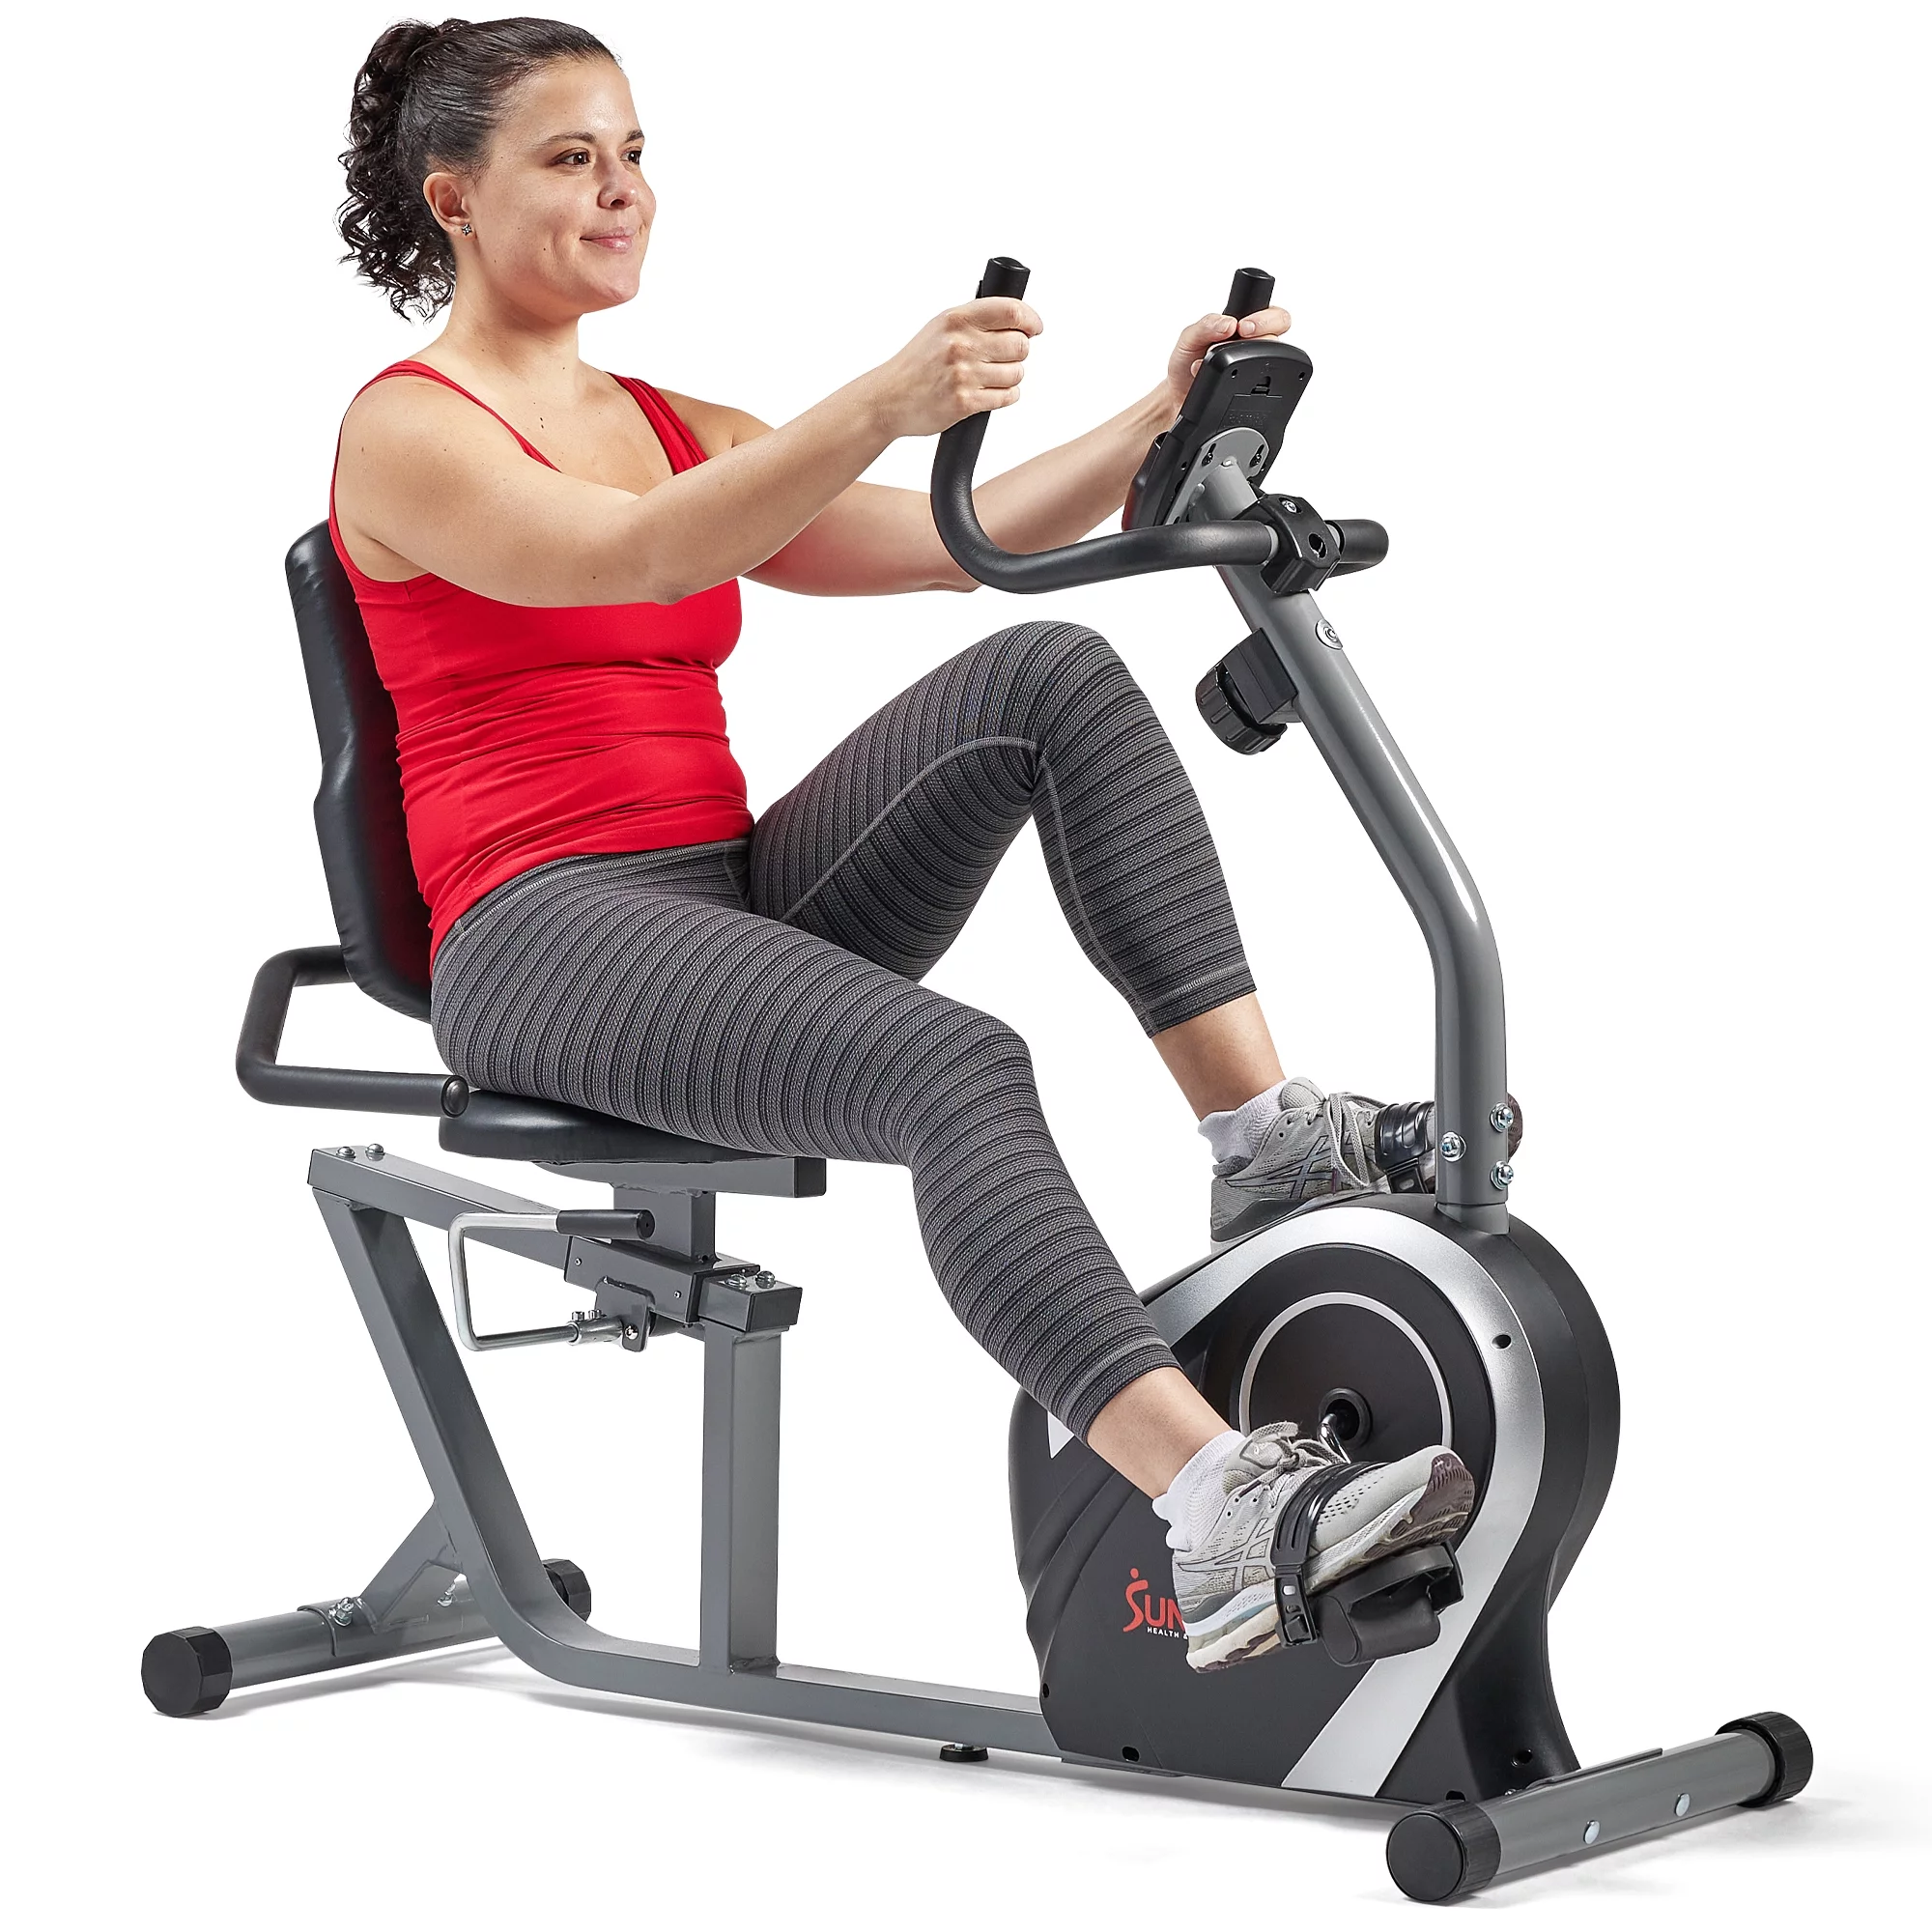 Sunny Health & Fitness Stationary Magnetic Workout Recumbent Exercise Cycle Bike, Adjustable Seat, 300 lb Max Capacity, SF-RB4616